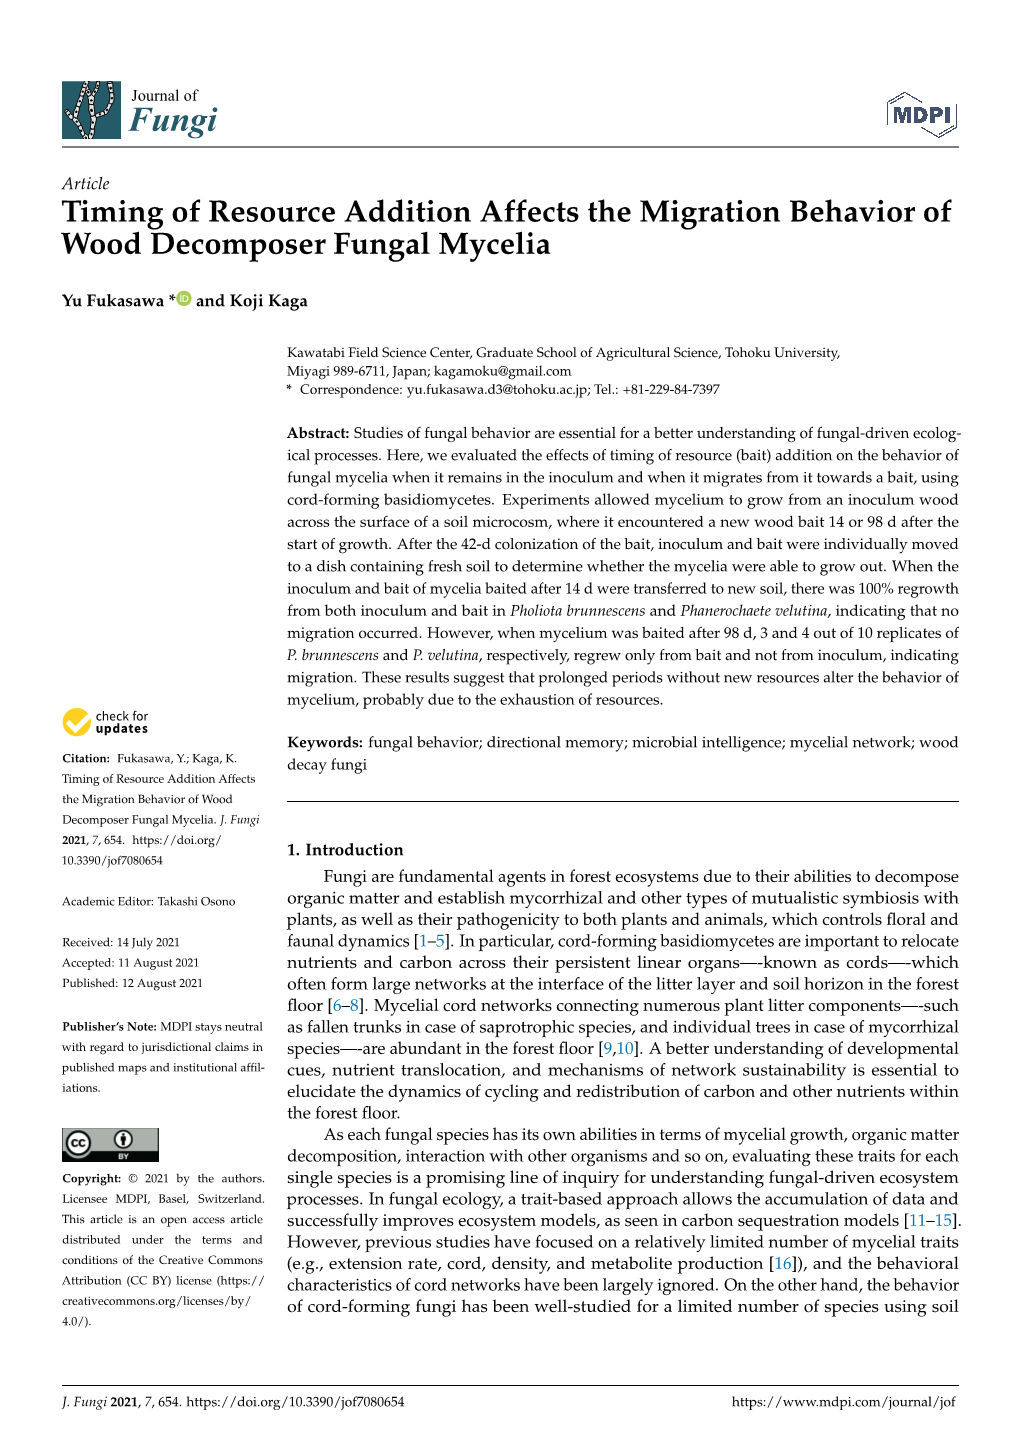 Timing of Resource Addition Affects the Migration Behavior of Wood Decomposer Fungal Mycelia